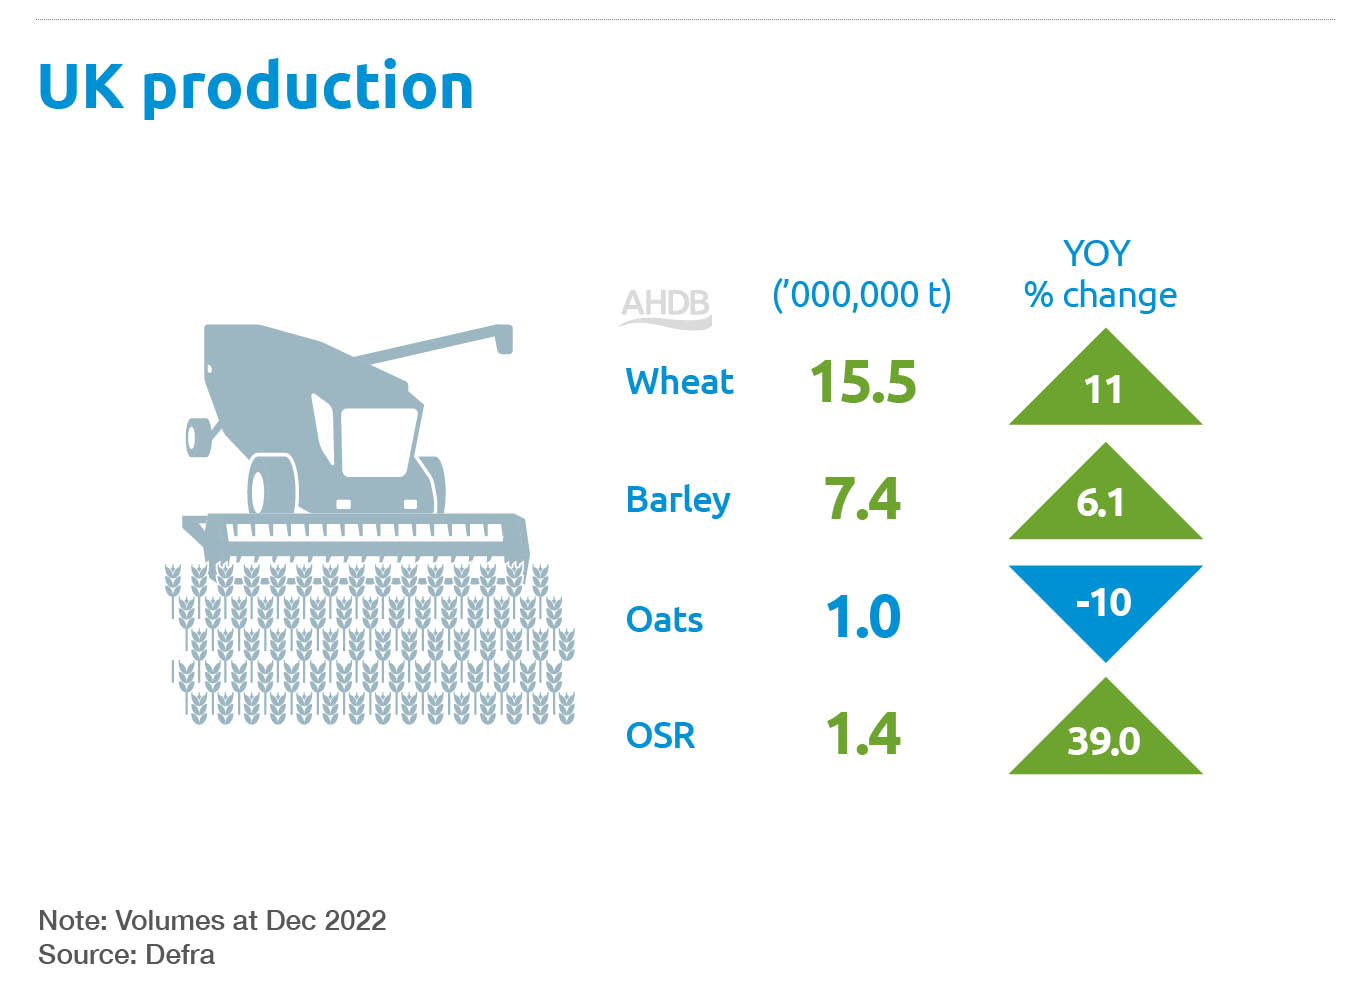 UK cereal and OSR production